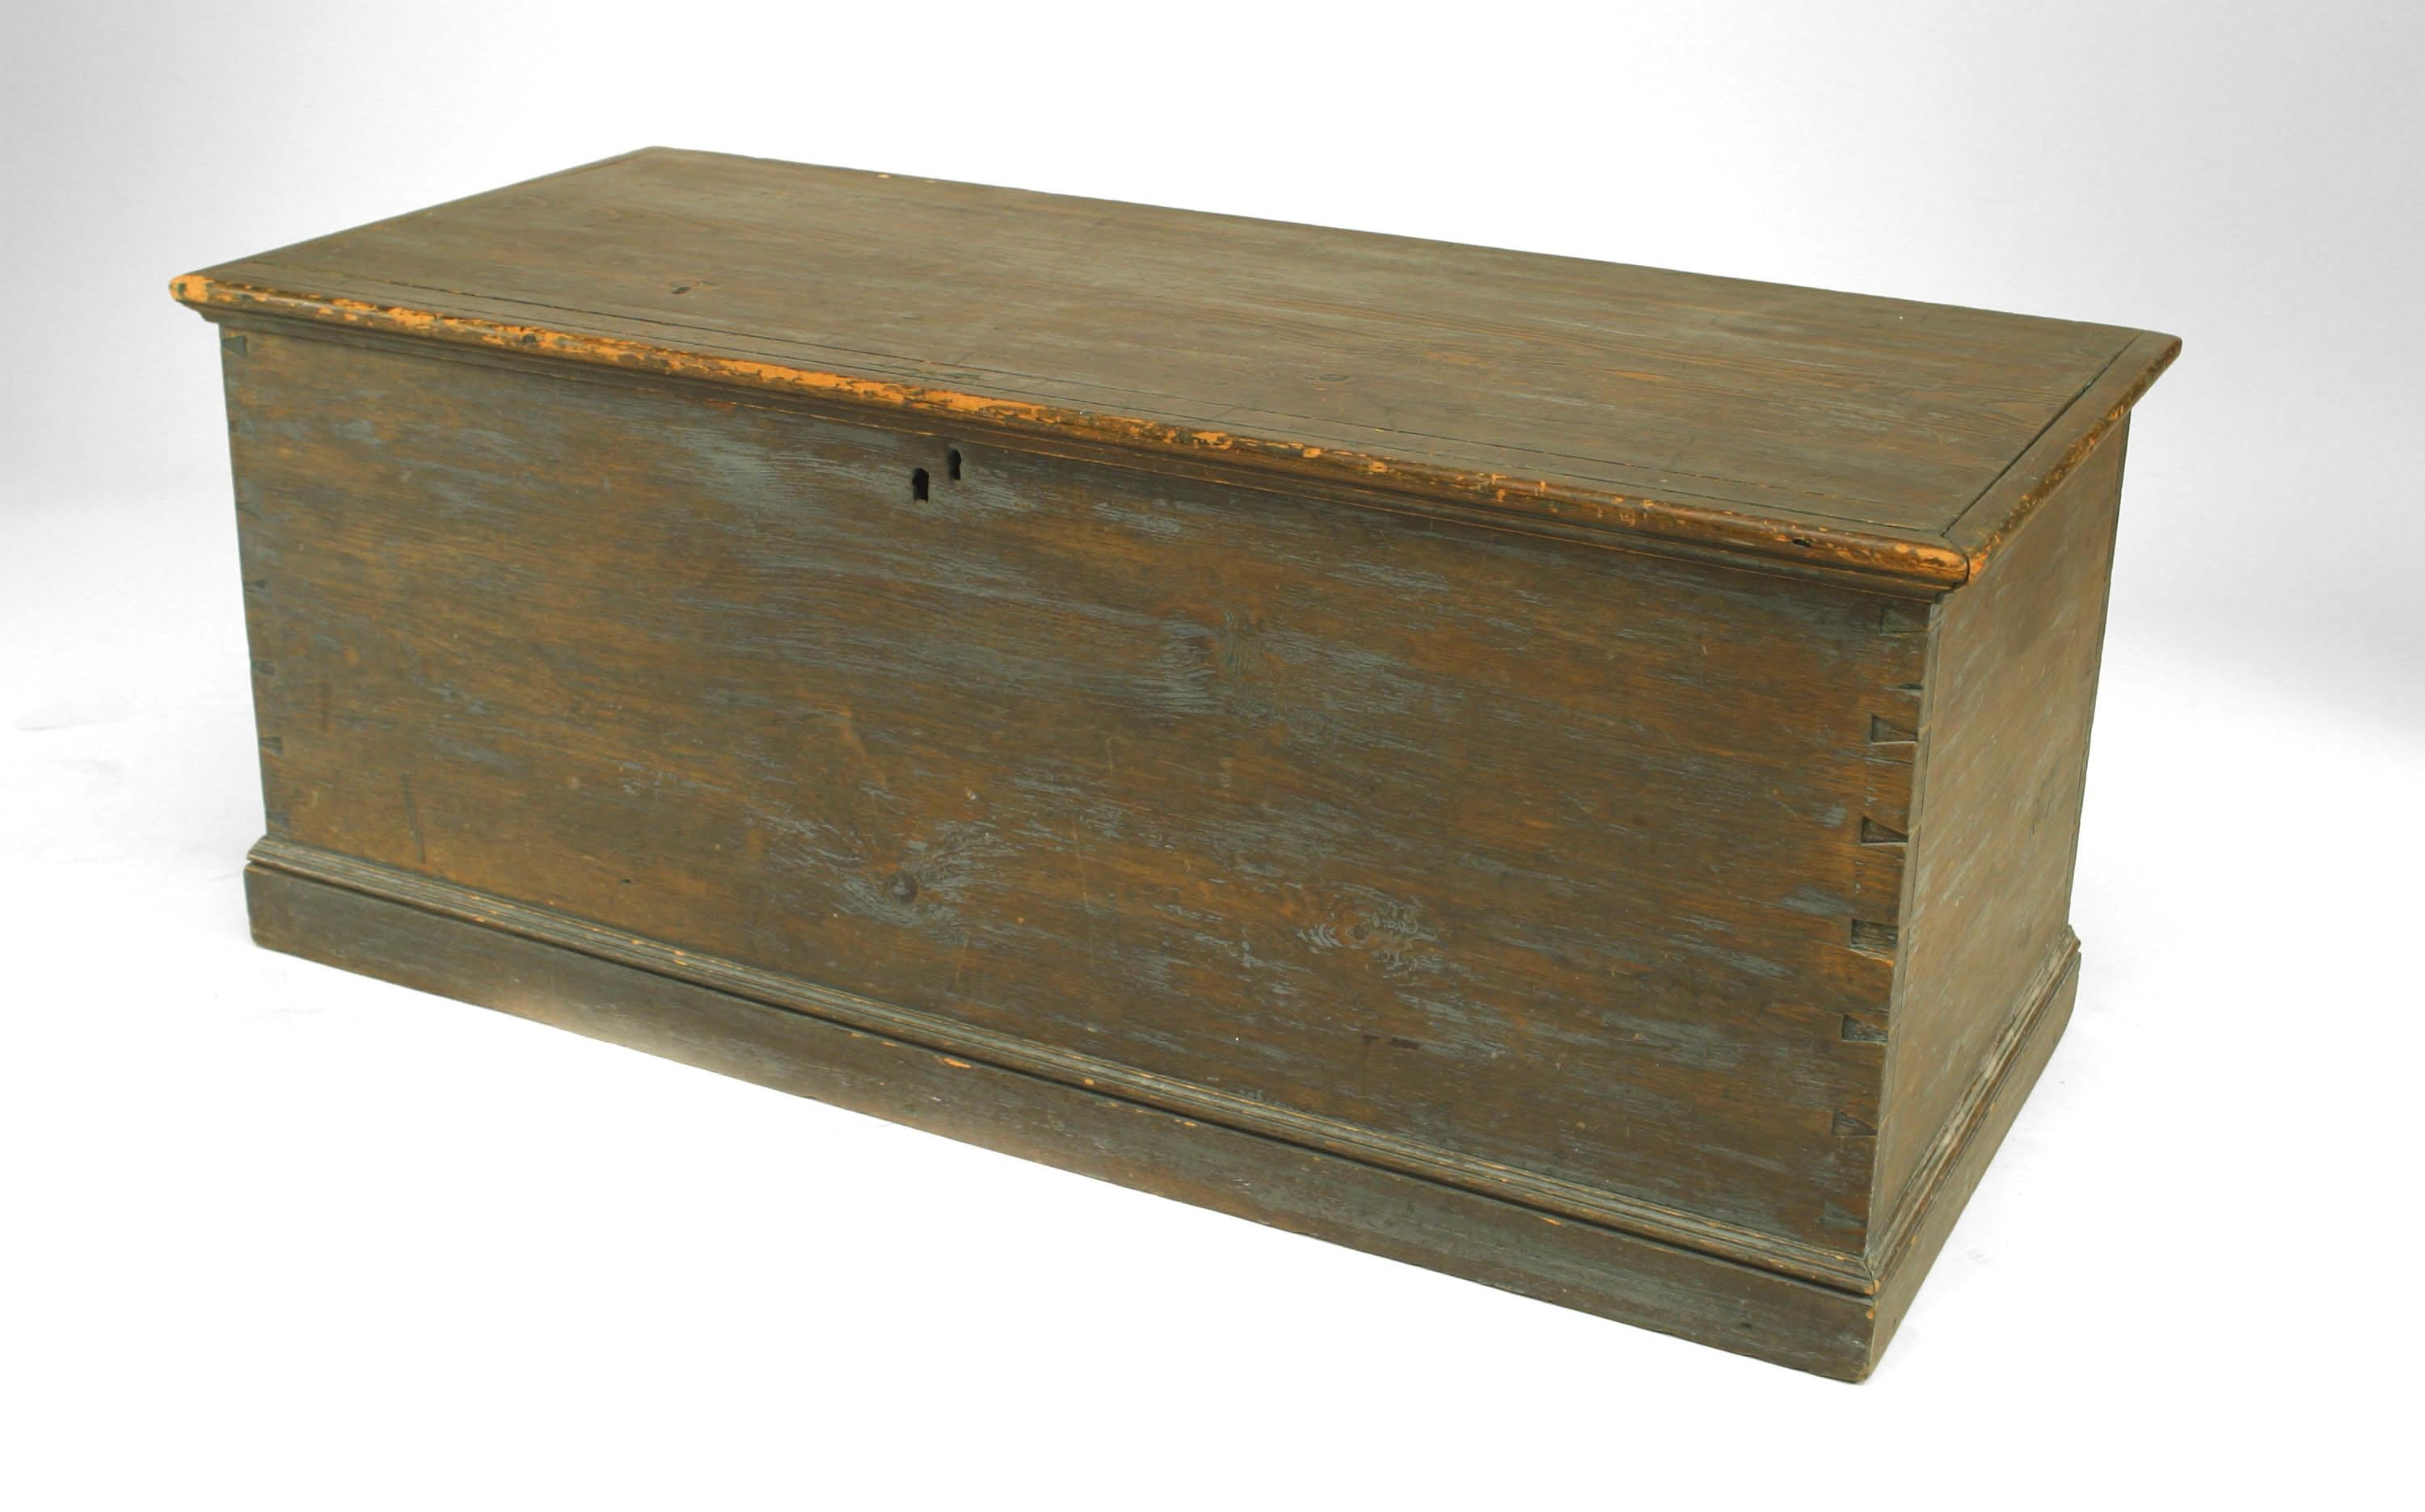 American Country (18/19th Cent) blue painted pine blanket chest/floor trunk.
